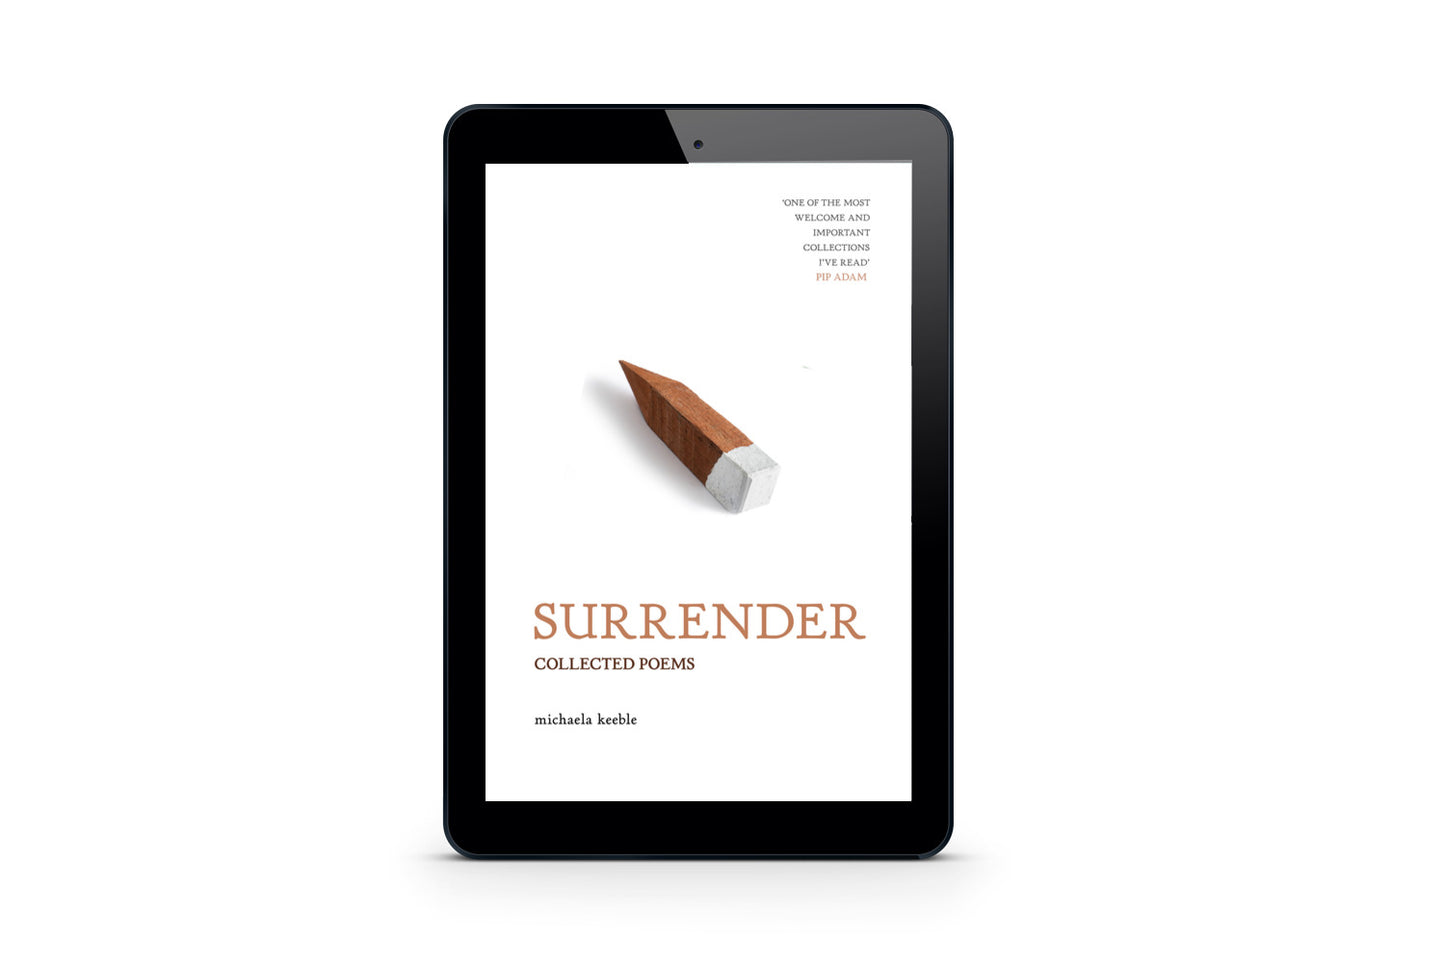 cover image of "surrender: poems" by michaela keeble, in an e-book reader image frame. image is a survey peg against a white background, appearing to float away from the ground.